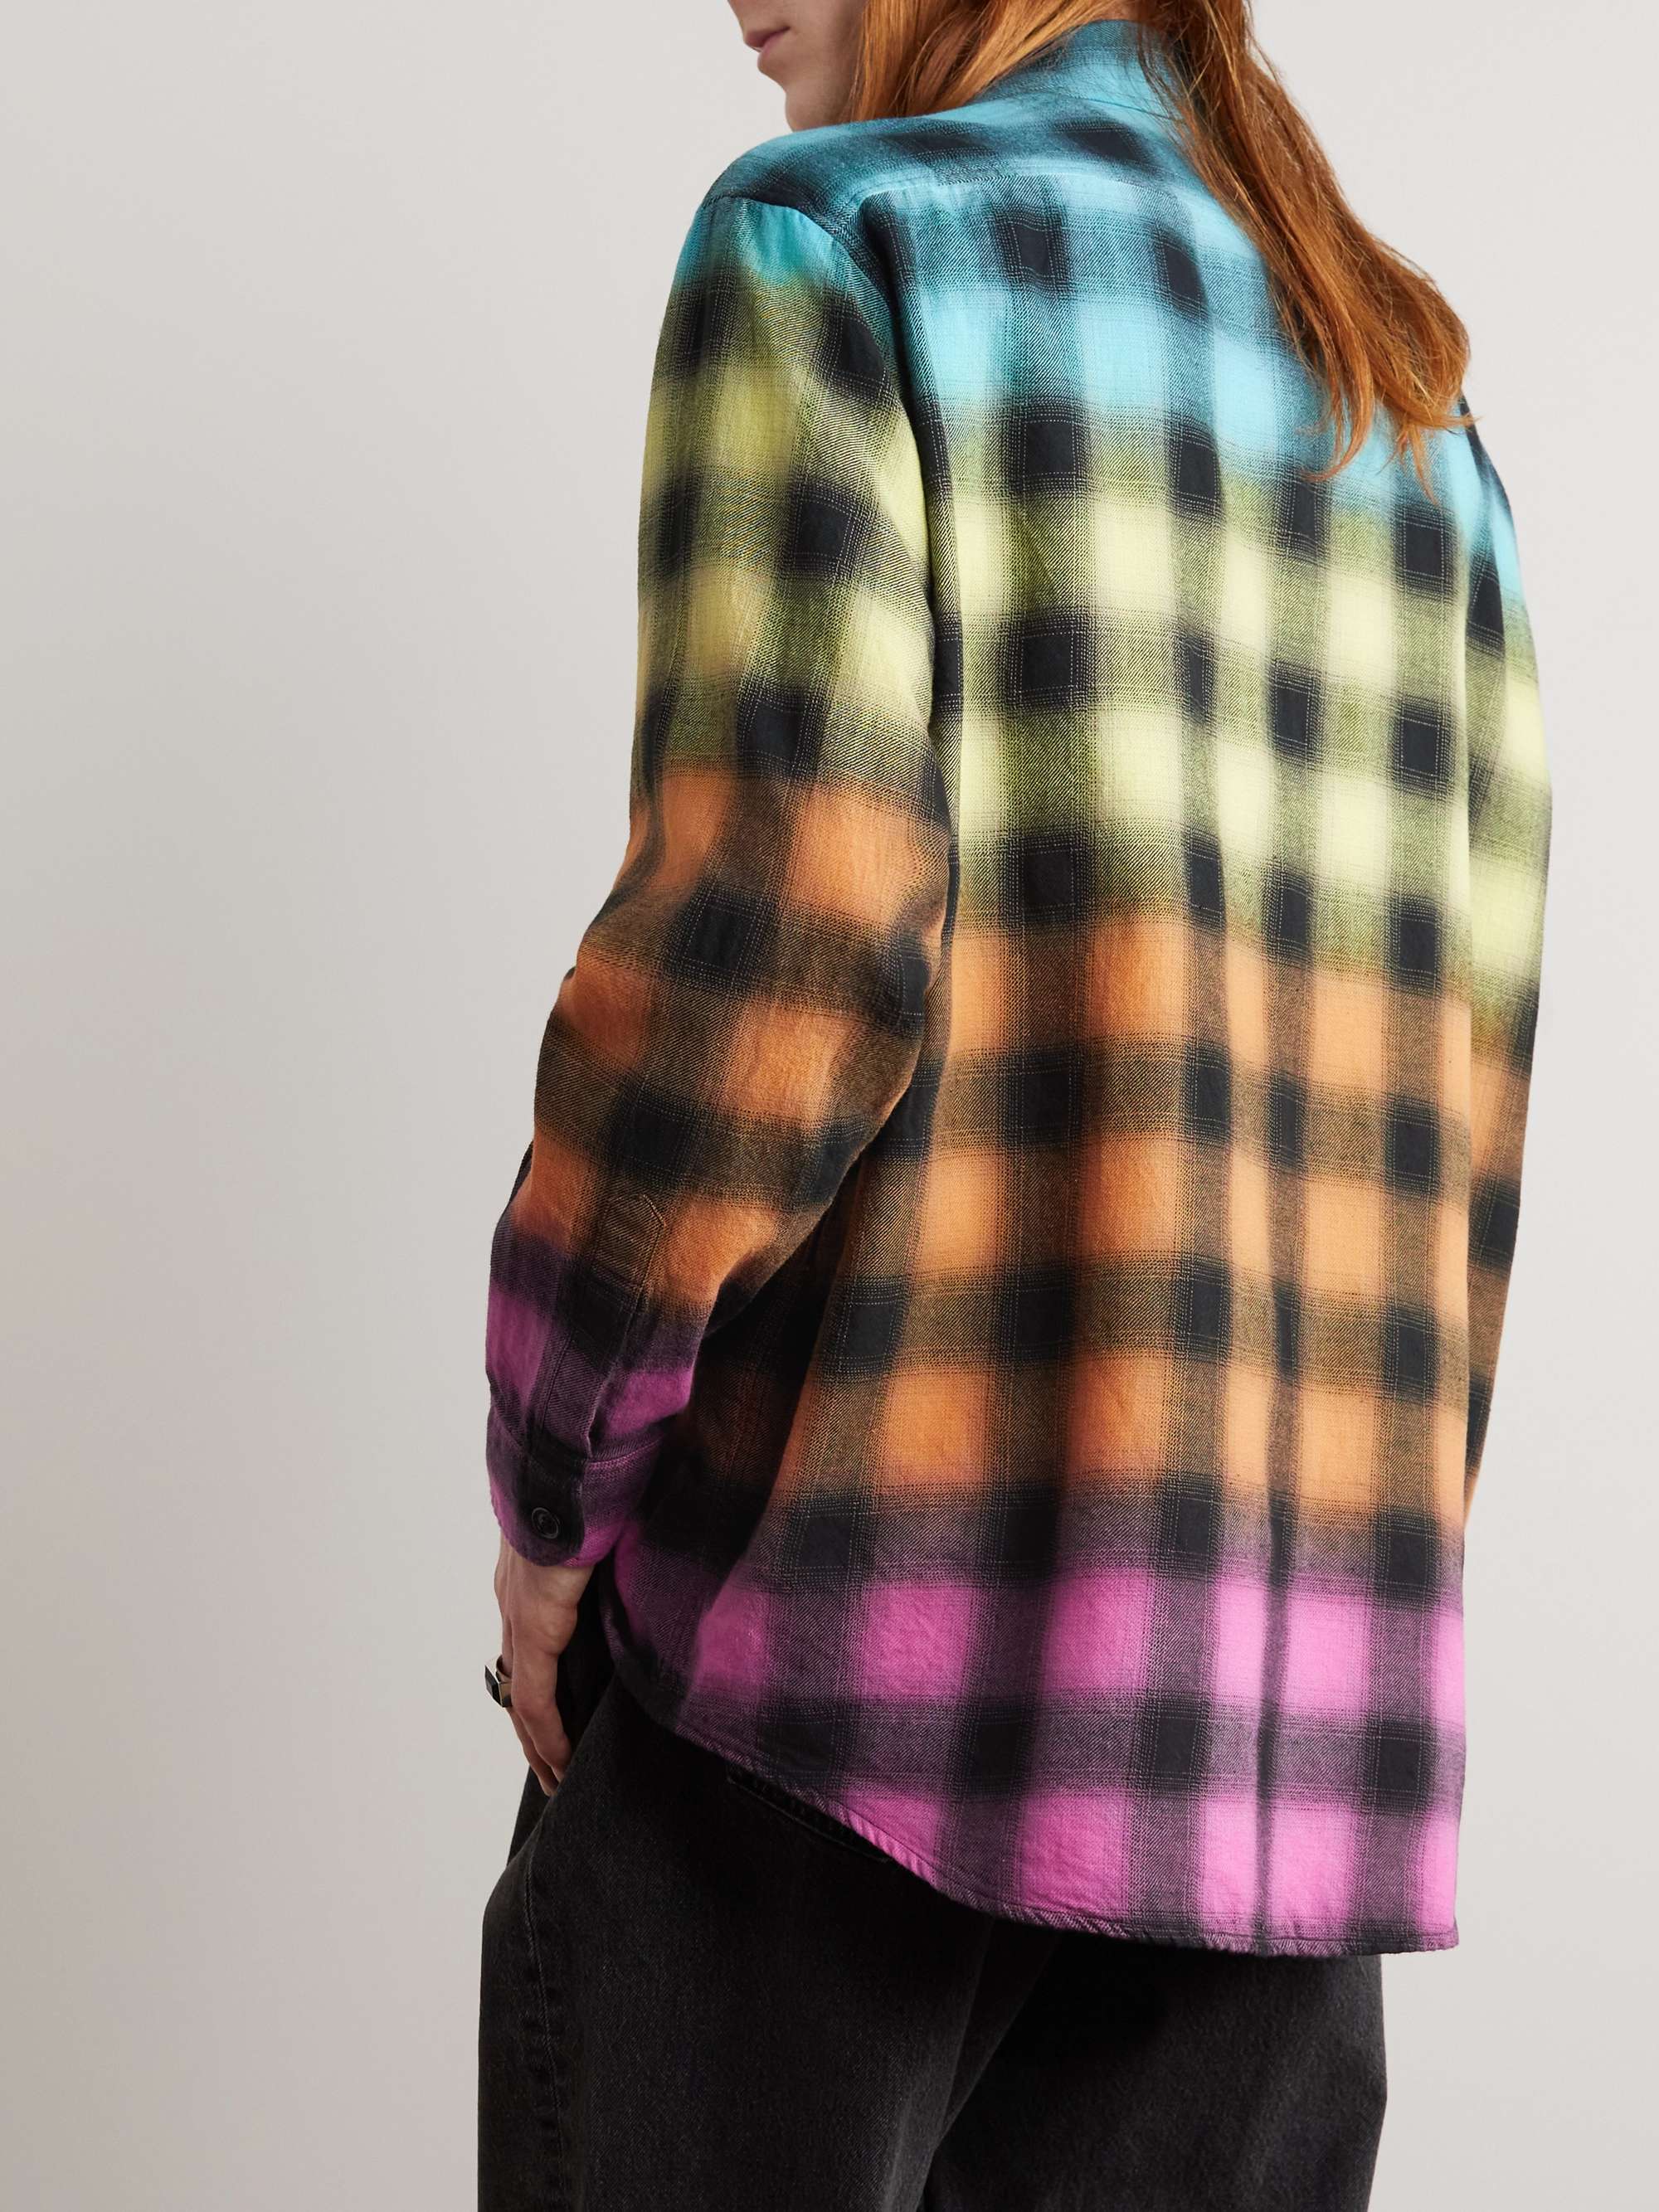 CELINE HOMME Tie-Dyed Checked Cotton-Blend Flannel Shirt